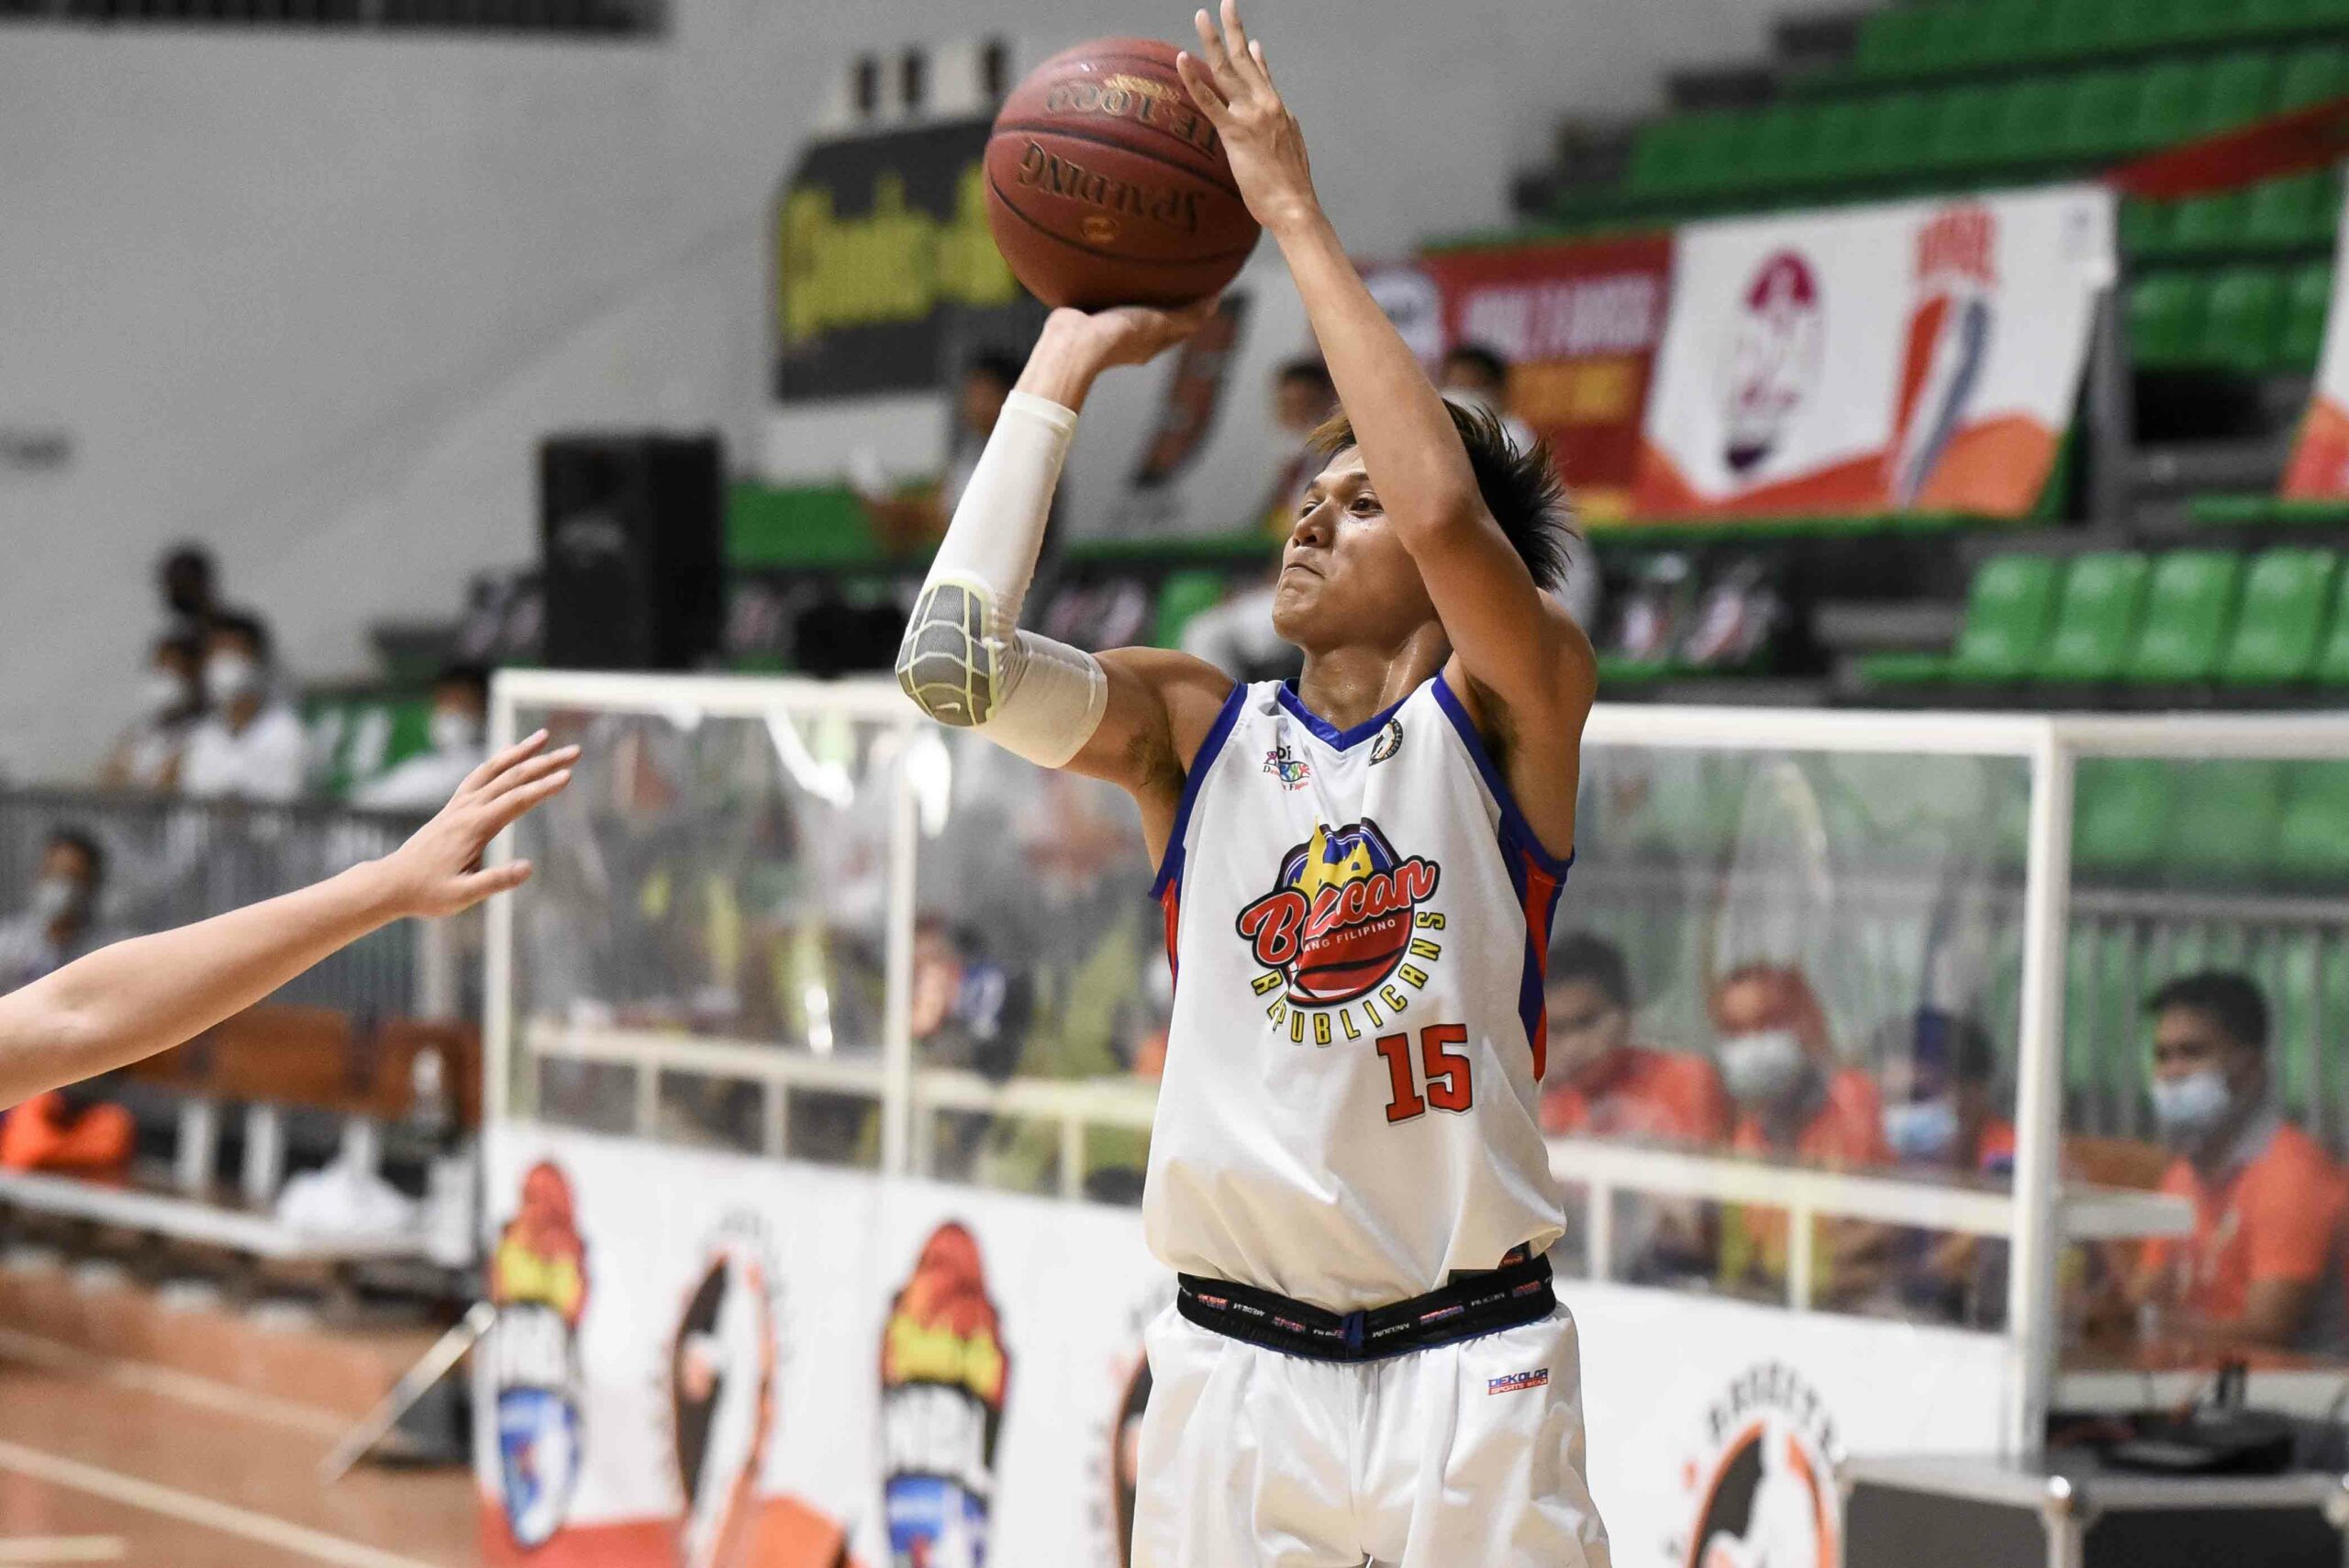 2021-Chooks-NBL-Bulacan-vs-Paranaque-Ryan-Operio-scaled Dominick Fajardo-powered Bulacan DF routs Paranaque for fifth NBL win Basketball NBL News  - philippine sports news